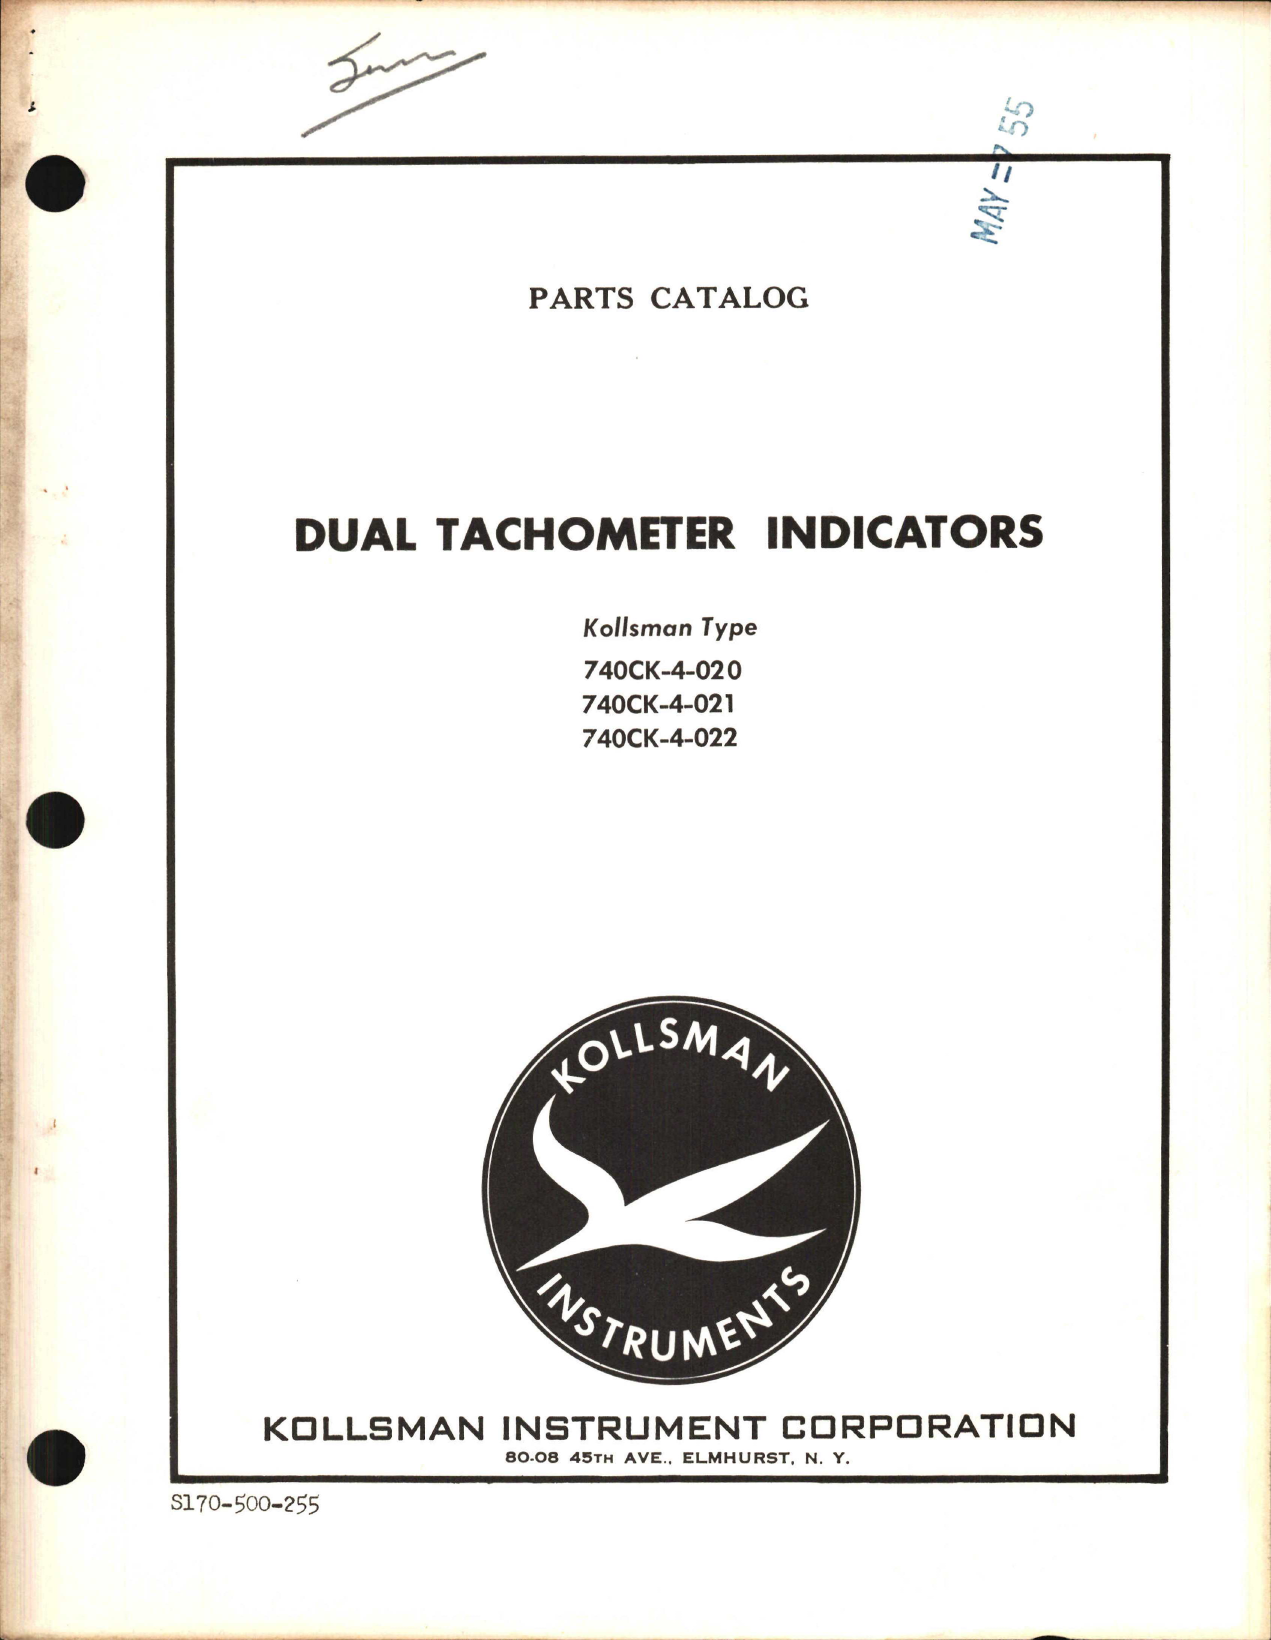 Sample page 1 from AirCorps Library document: Parts Catalog for Kollsman Dual Tachometer Indicators